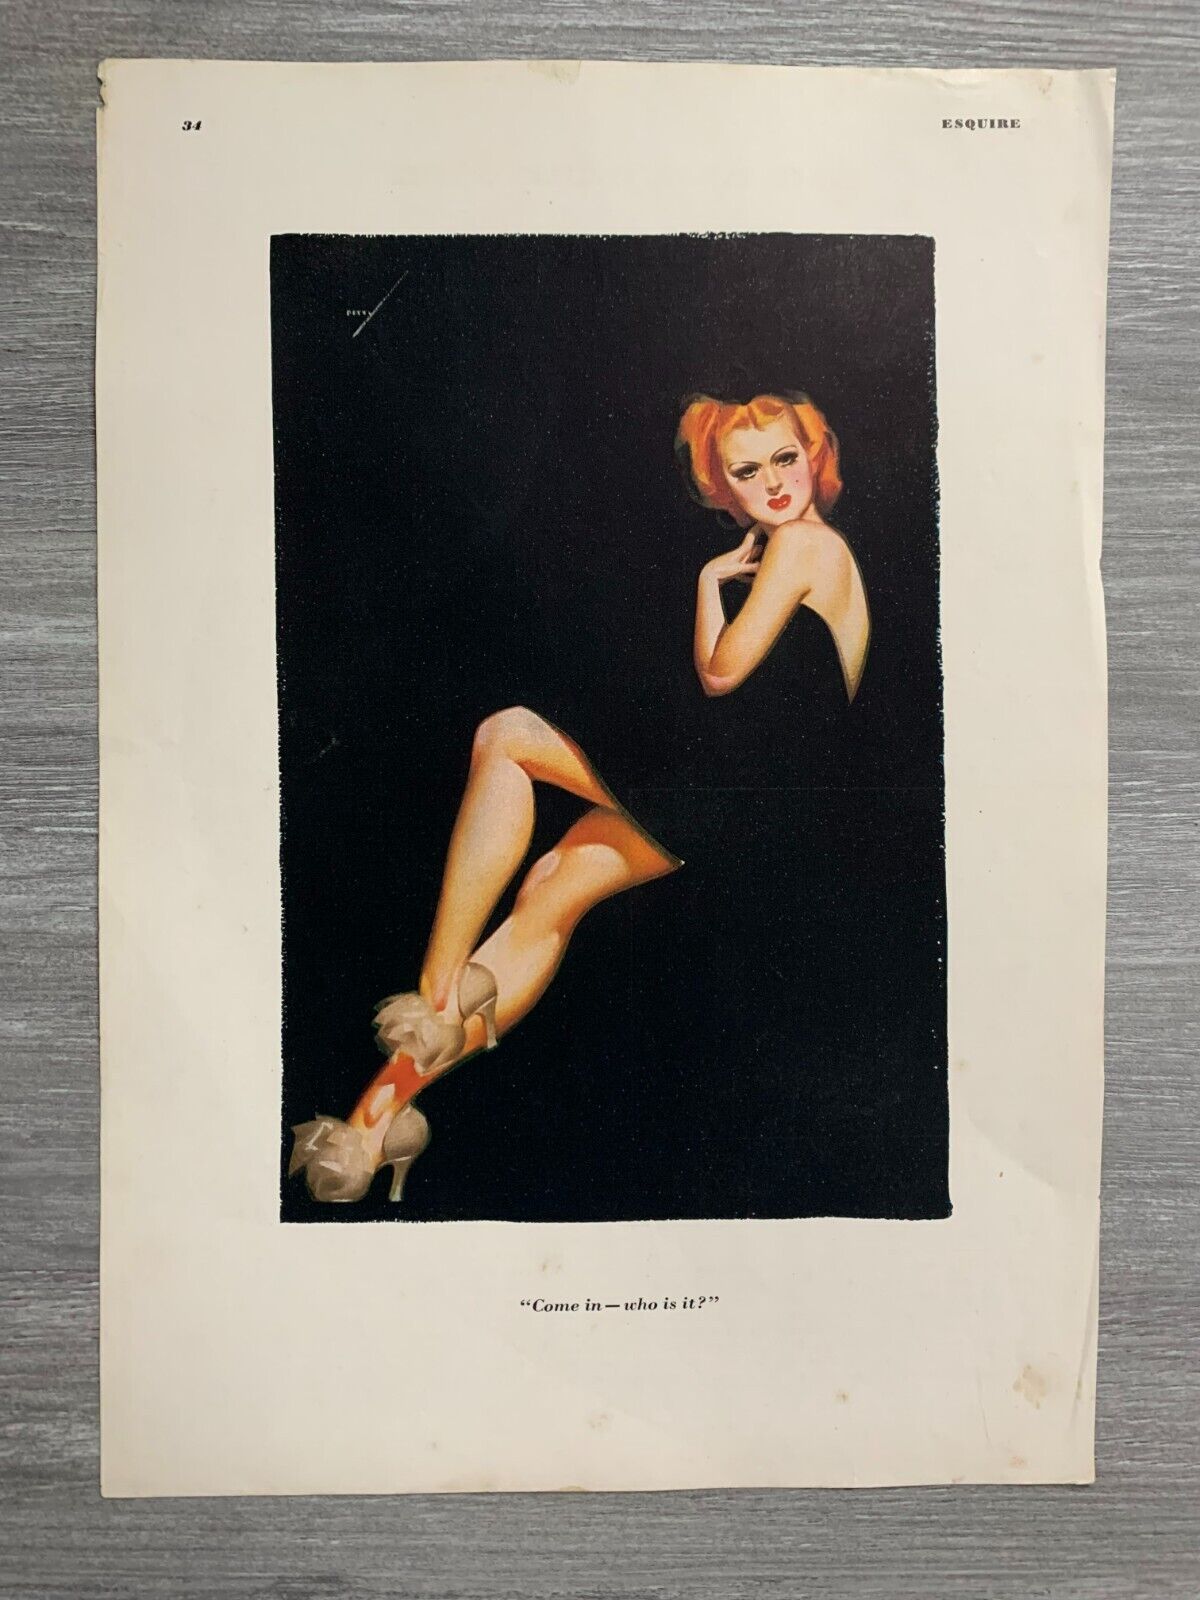 1936 Sept ESQUIRE MAGAZINE Petty Girl Pin-Up Page (6.0) Come In... Who is It?